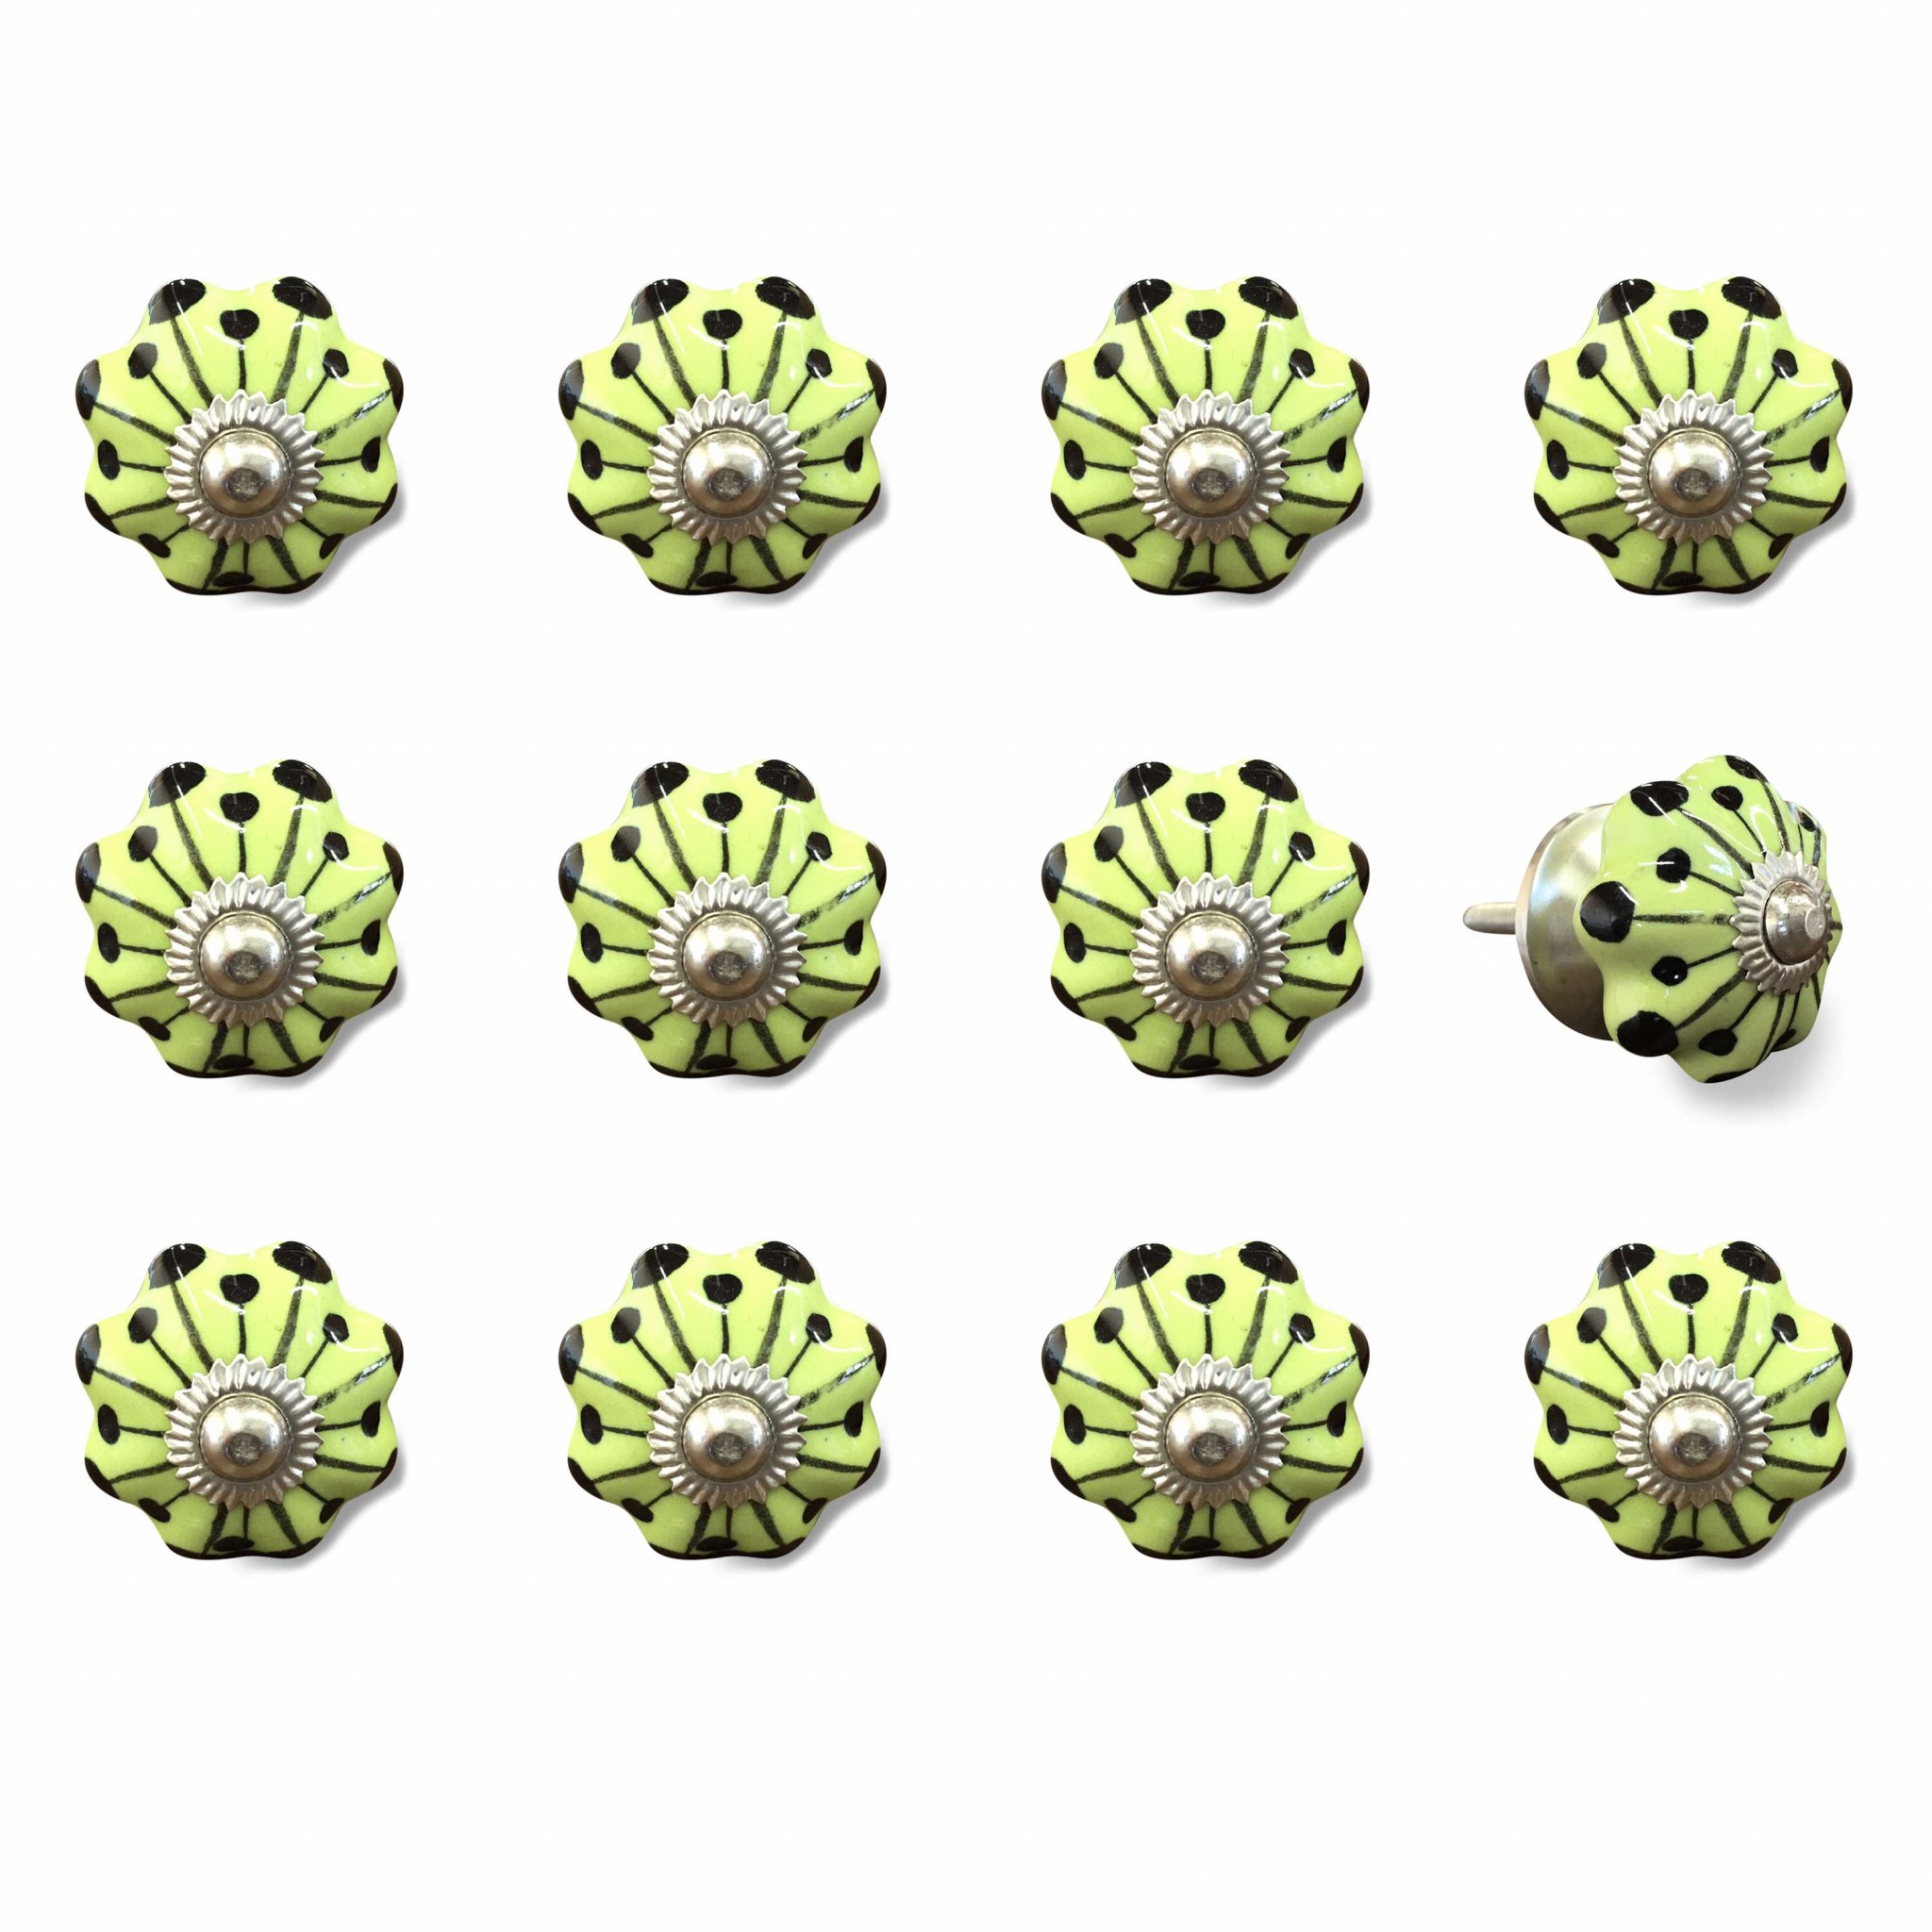 1.5" x 1.5" x 1.5" Yellow, Green and Silver - Knobs 12-Pack